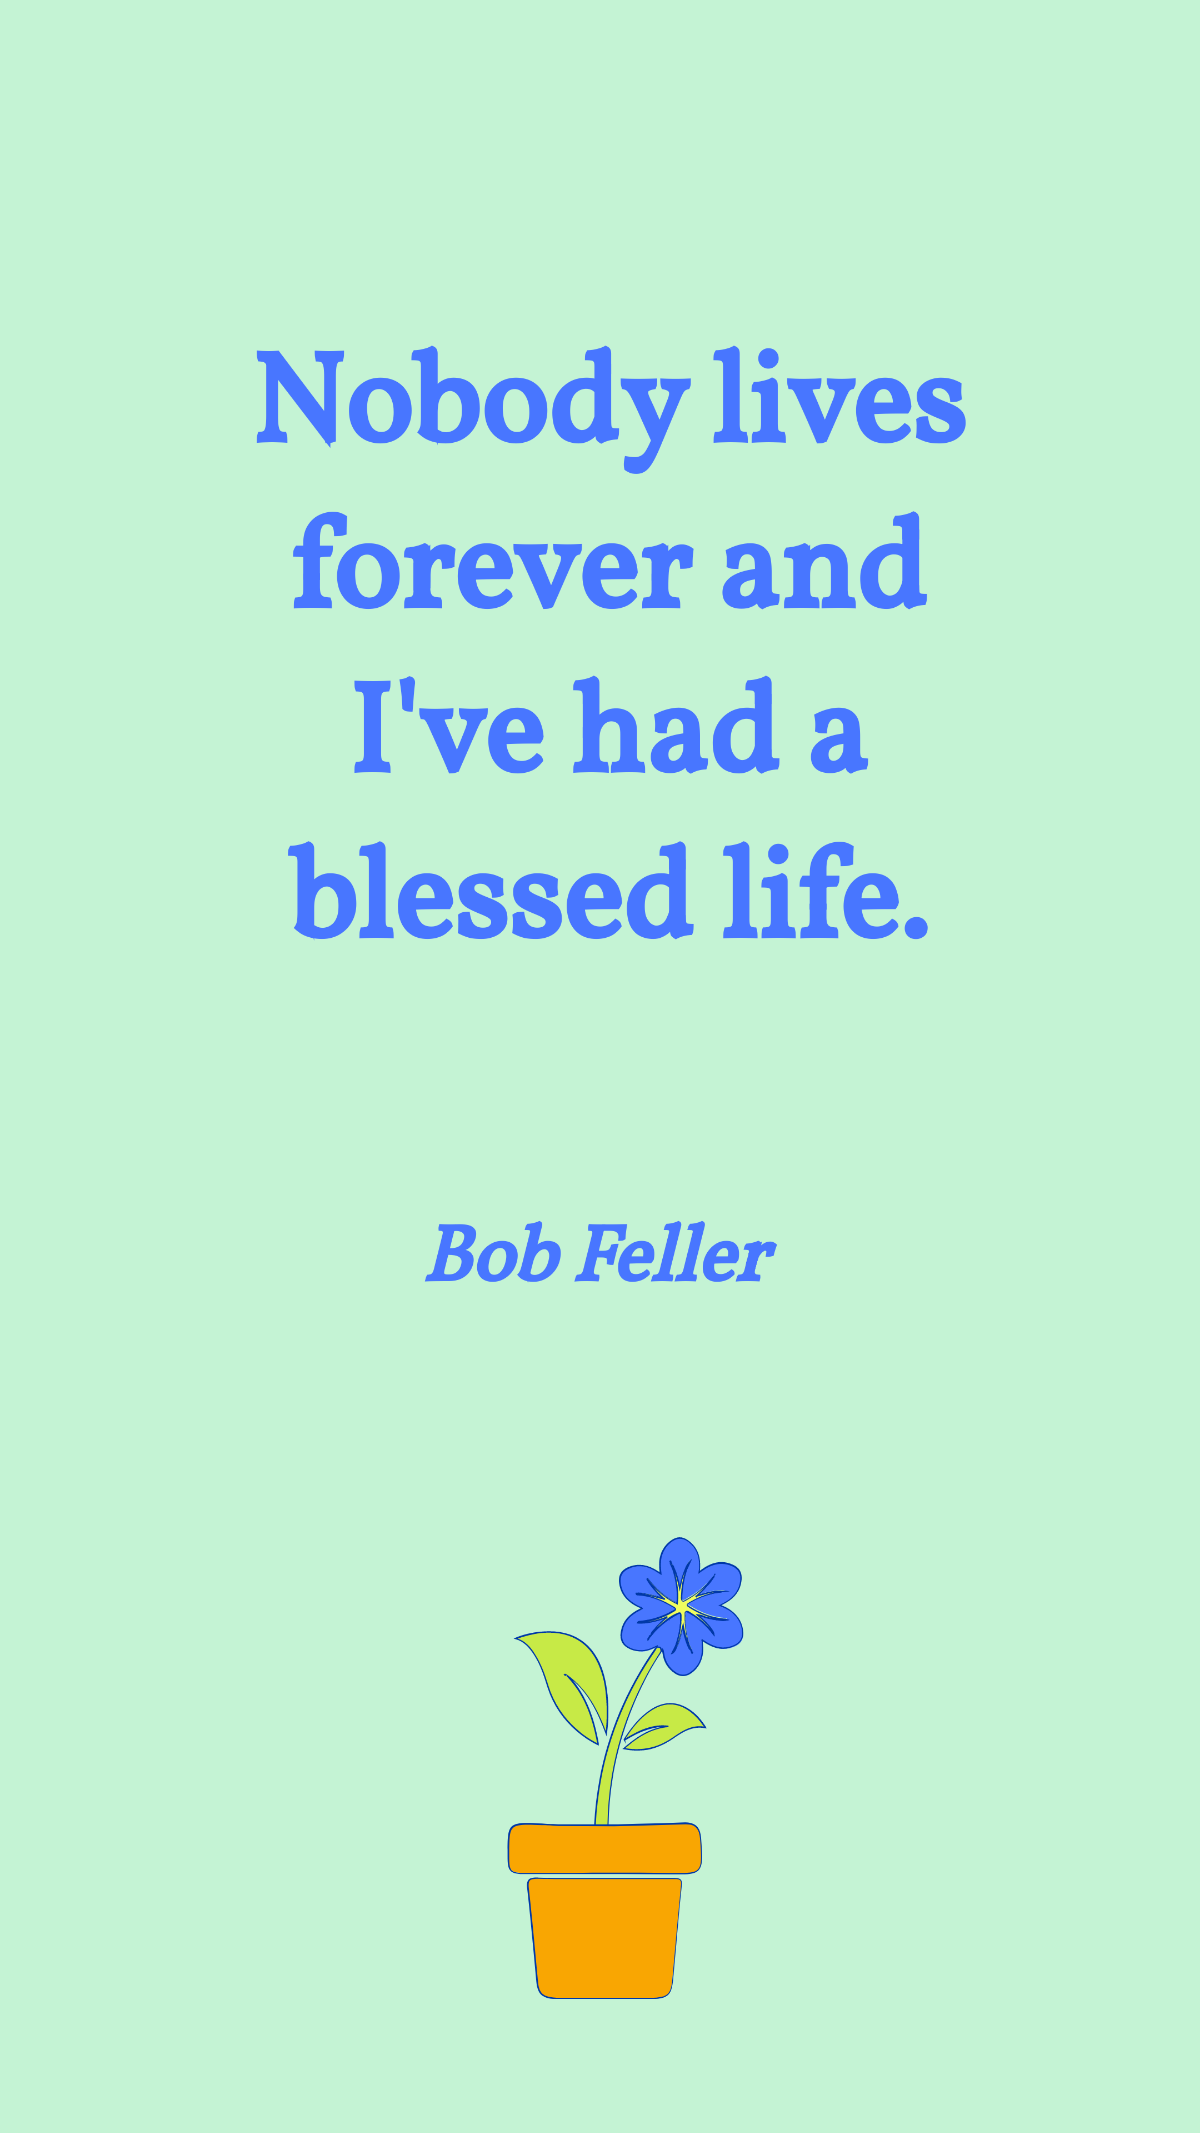 Bob Feller - Nobody lives forever and I've had a blessed life. Template